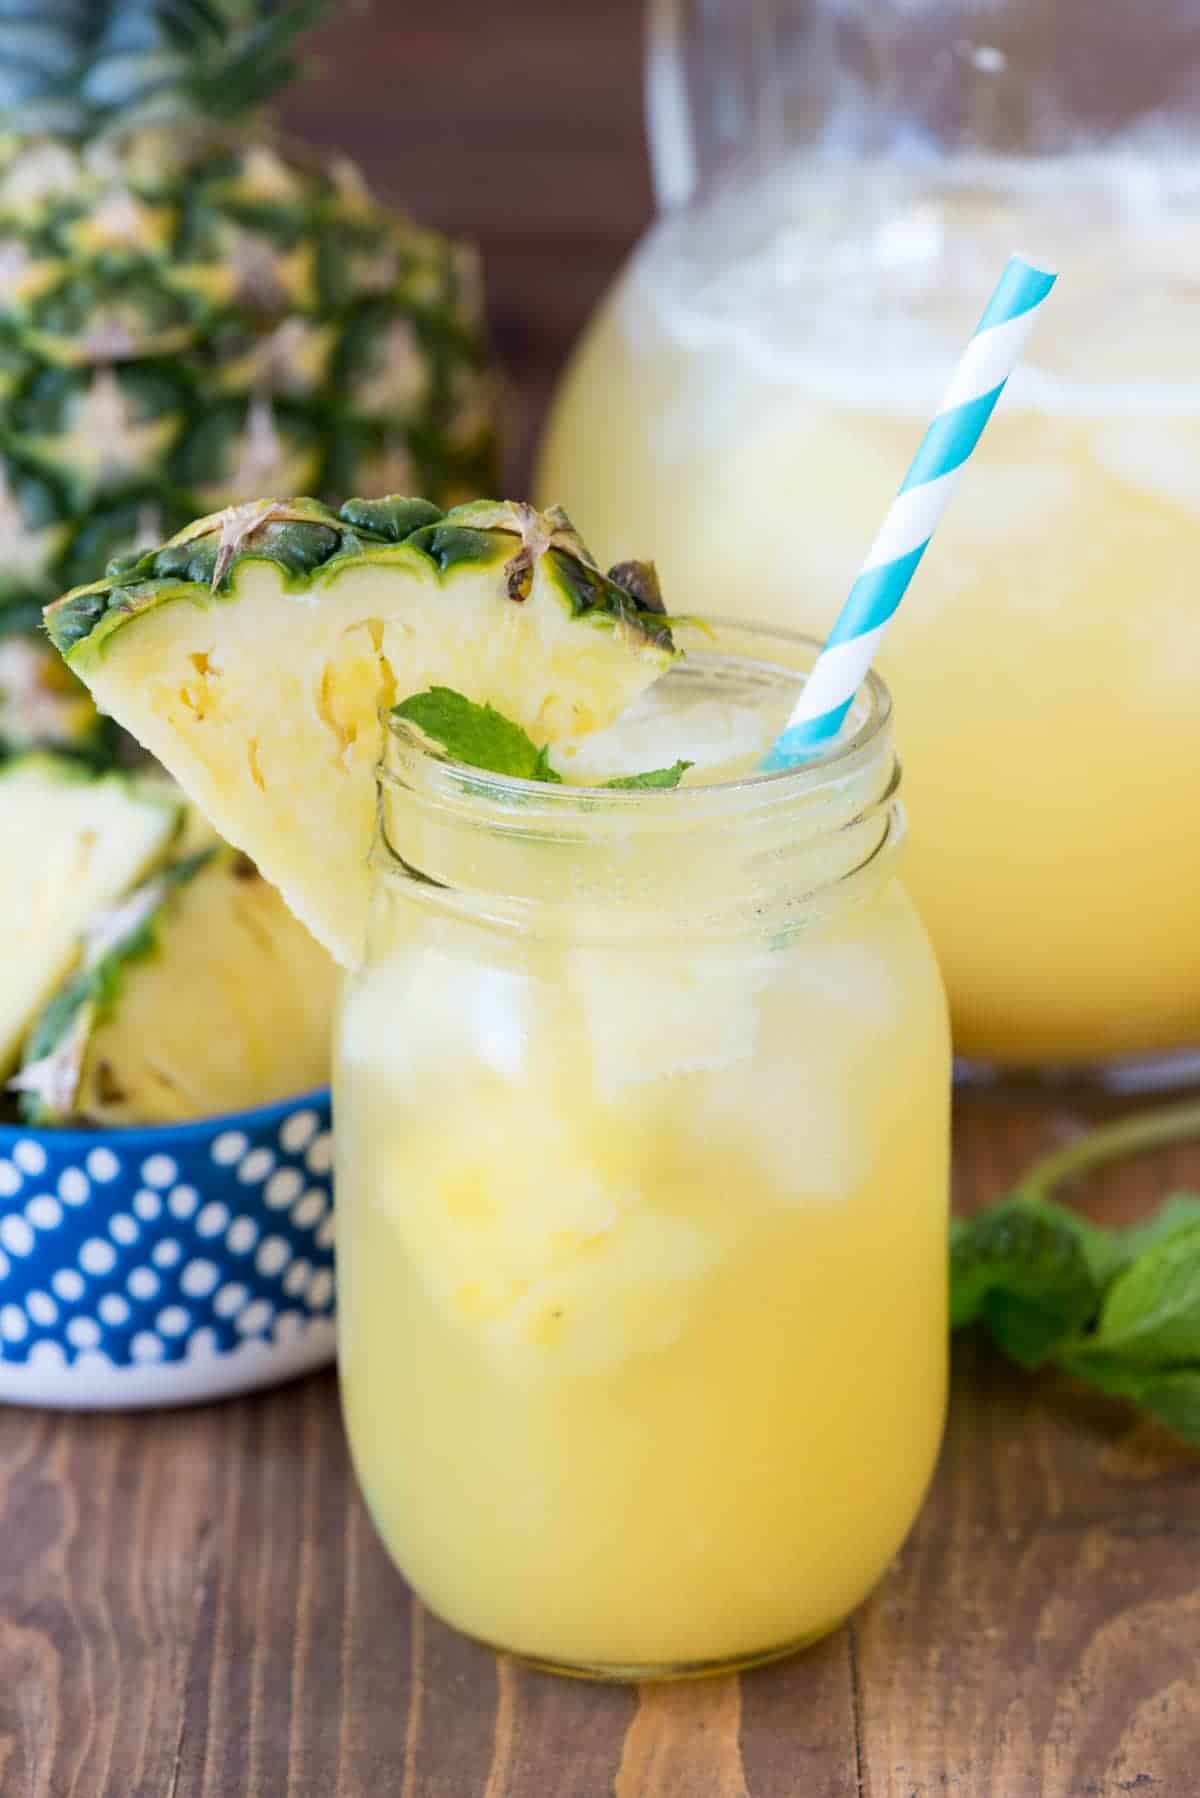 Pineapple party punch